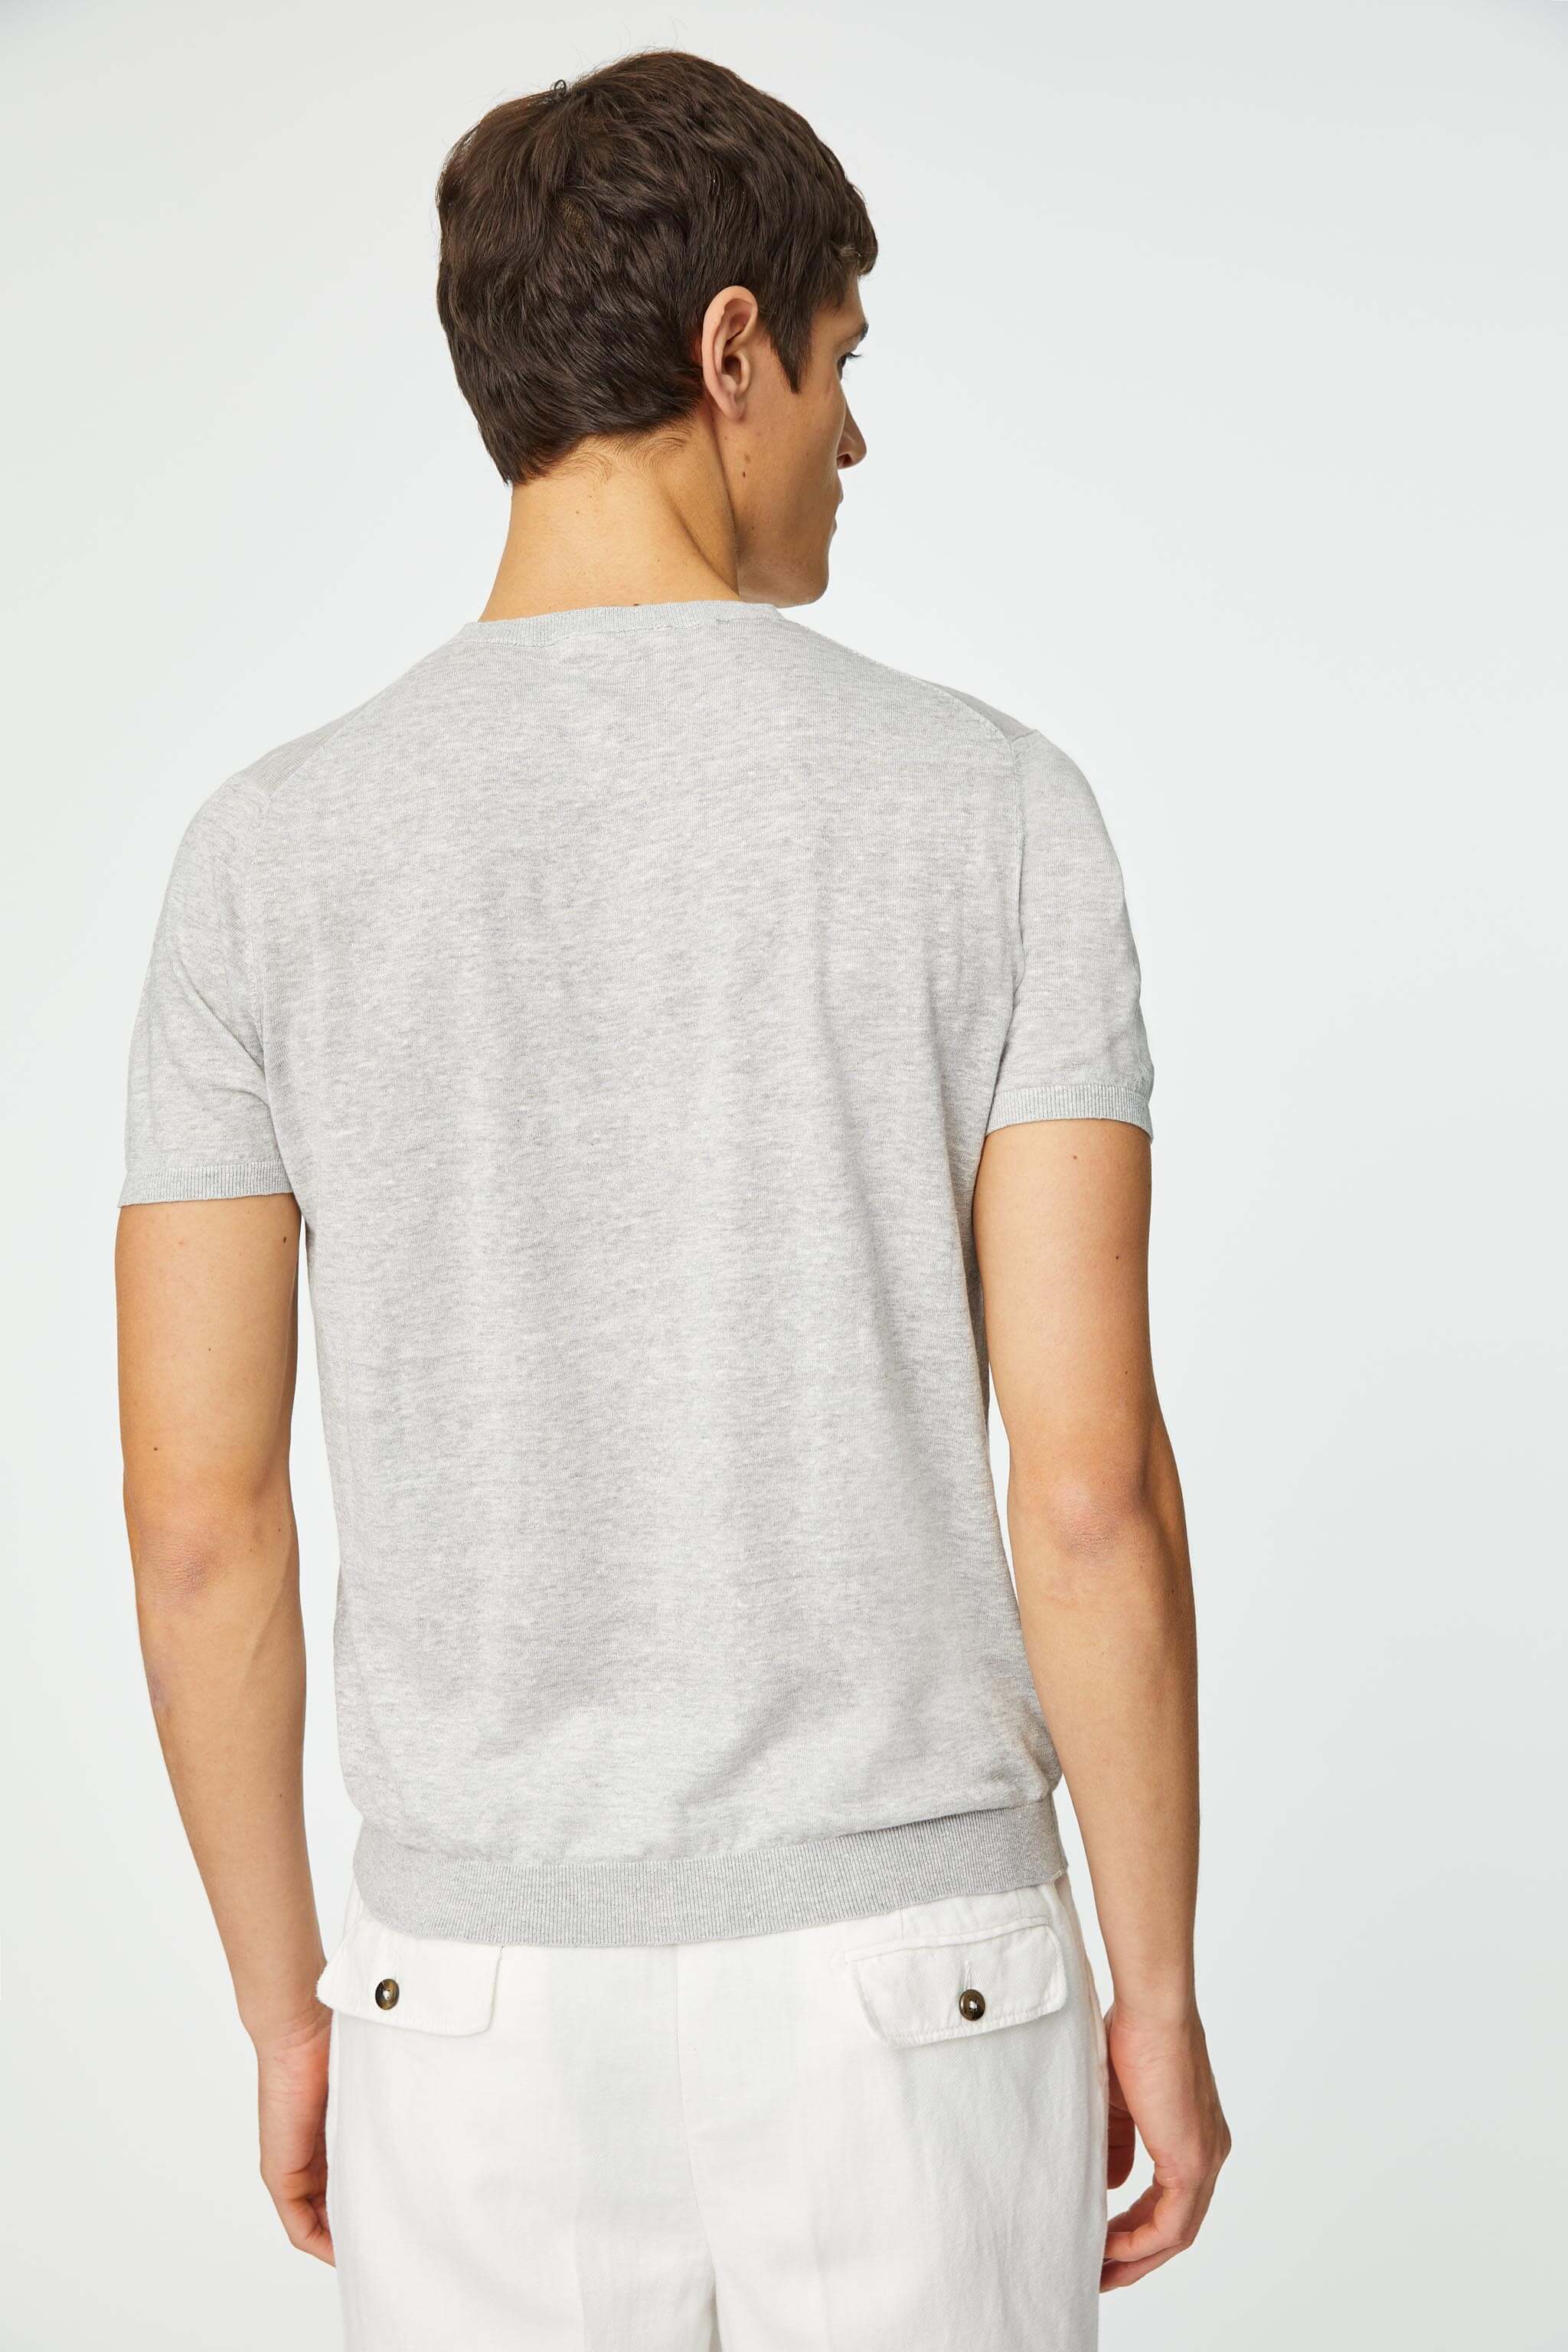 Linen and cotton T-shirt in soft gray